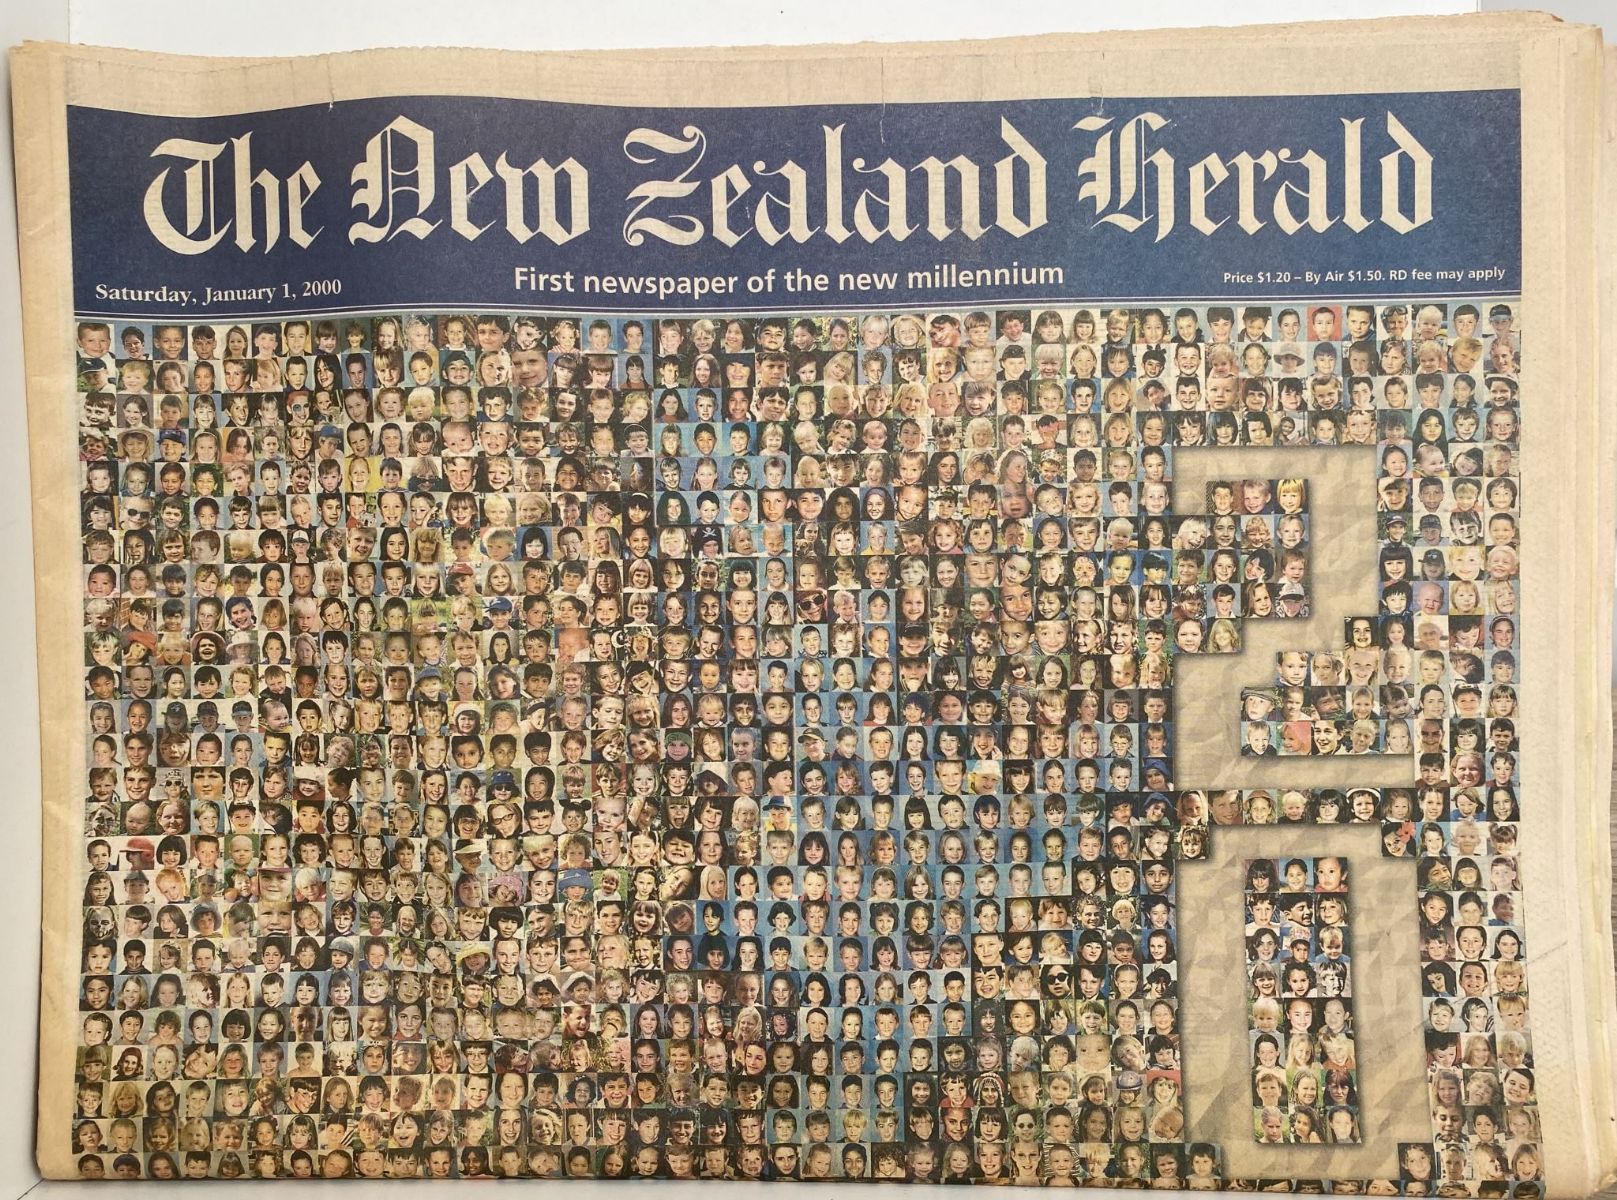 OLD NEWSPAPER: The New Zealand Herald, 1st January 2000 - new millennium